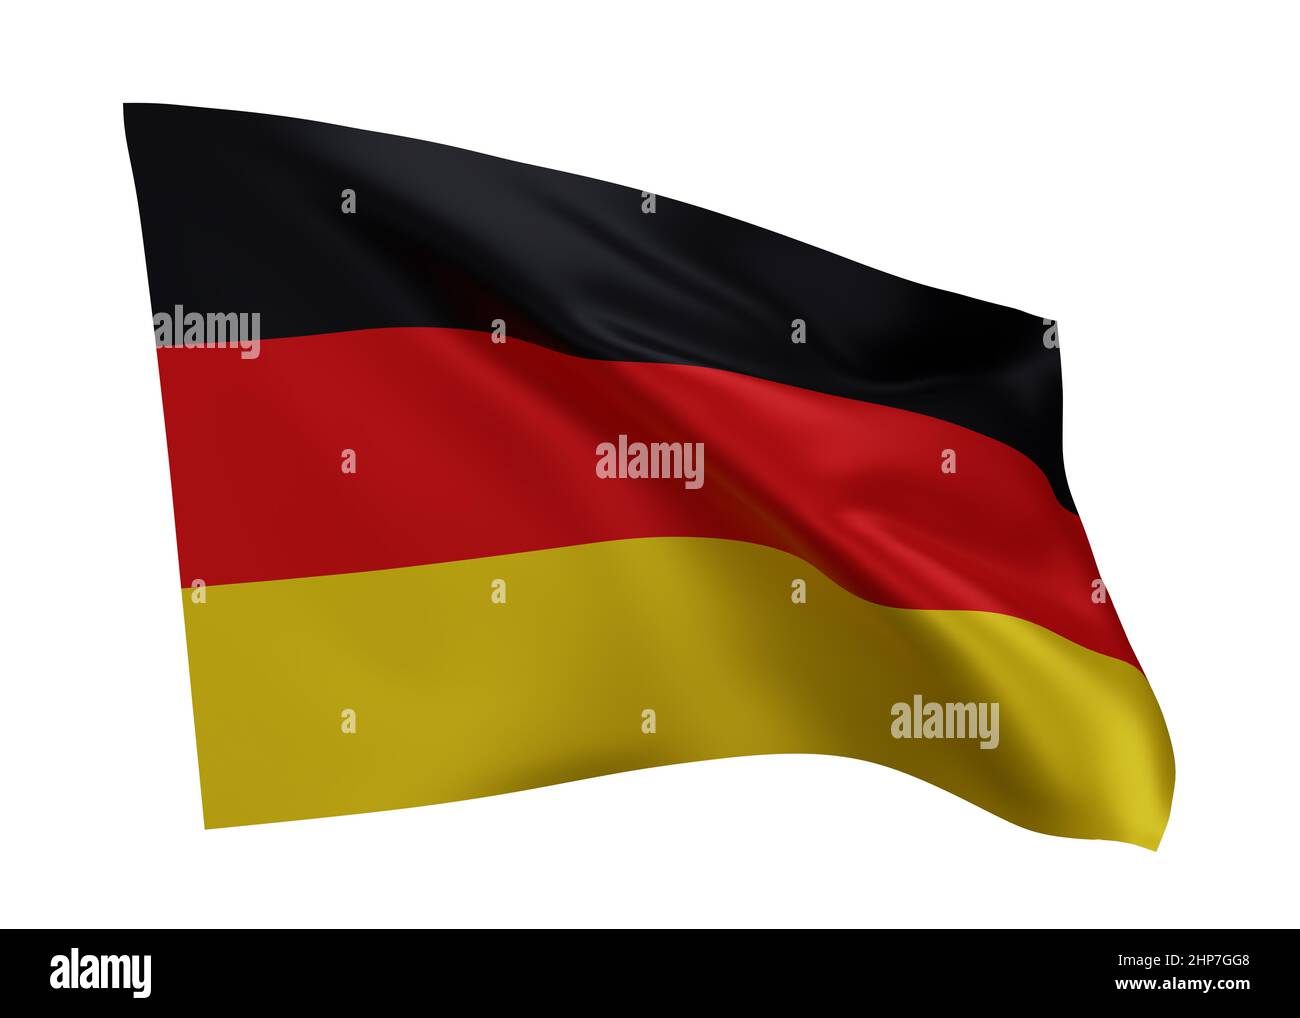 3d illustration flag of Germany. German high resolution flag isolated against white background. 3d rendering Stock Photo